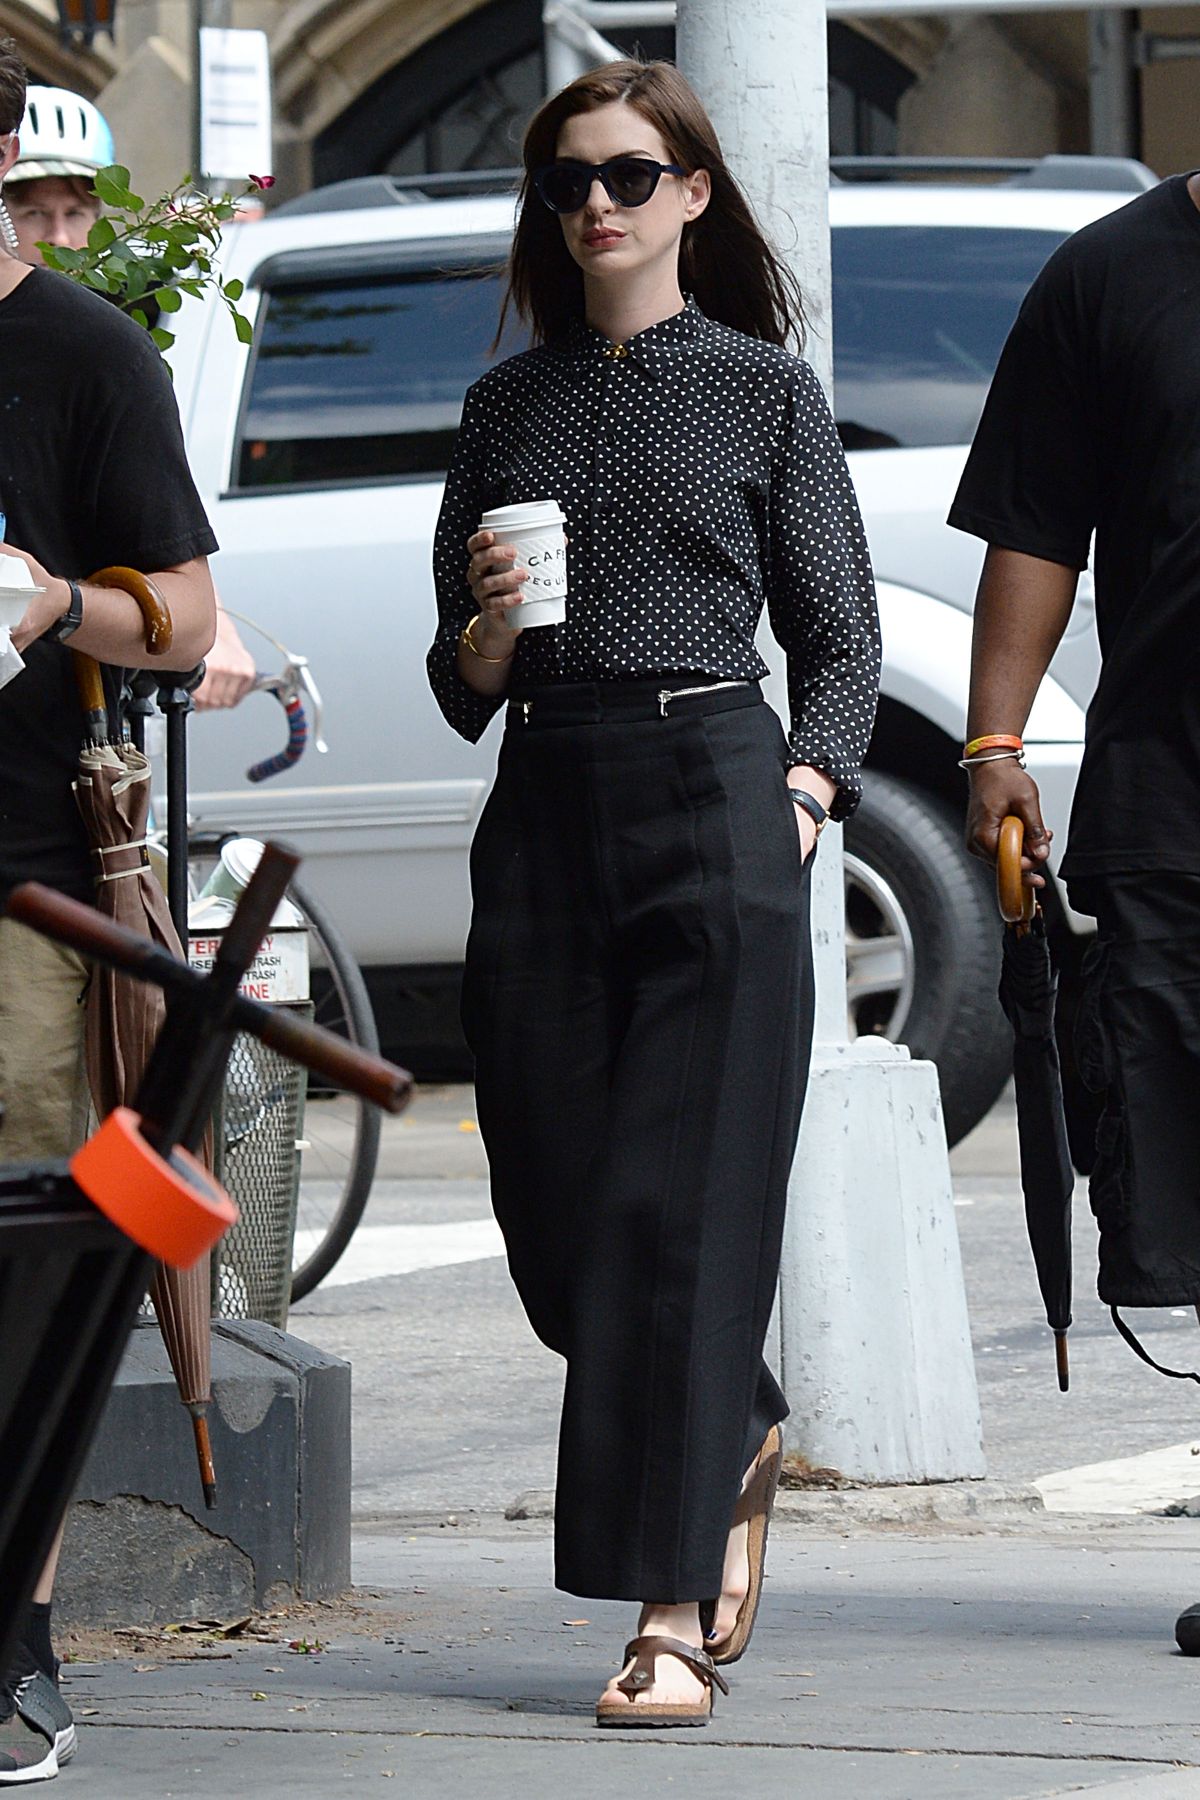 ANNE HATHAWAY on the Set of The Intern in New York – HawtCelebs